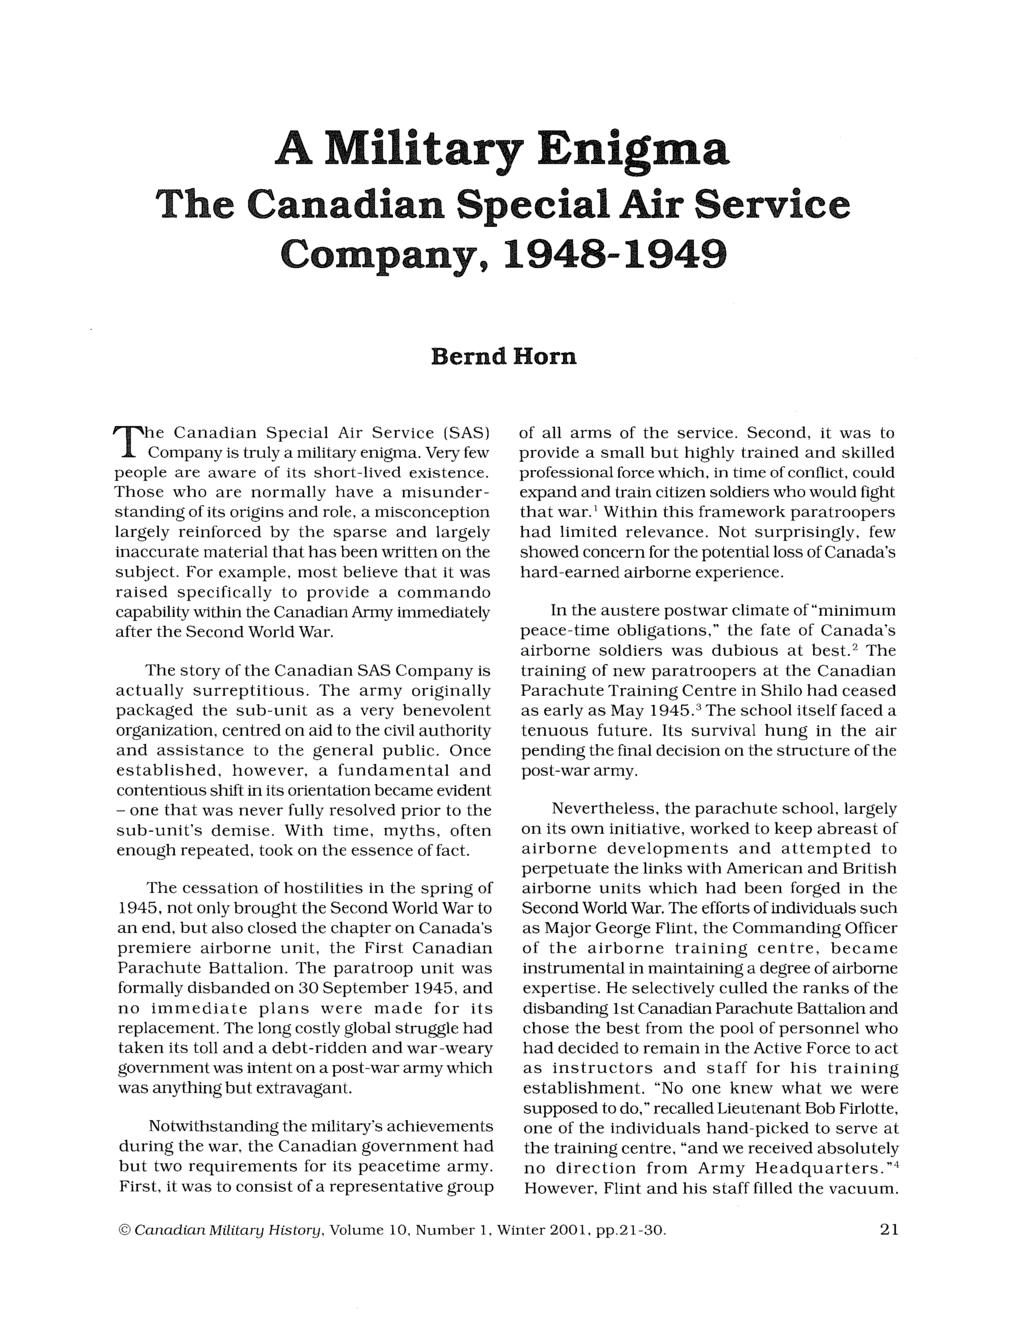 Horn: A Military Engima A Military Enigma The Canadian Special Air Service Company, 1948-1949 Bernd Horn The Canadian Special Air Service (SAS) Company is truly a military enigma.